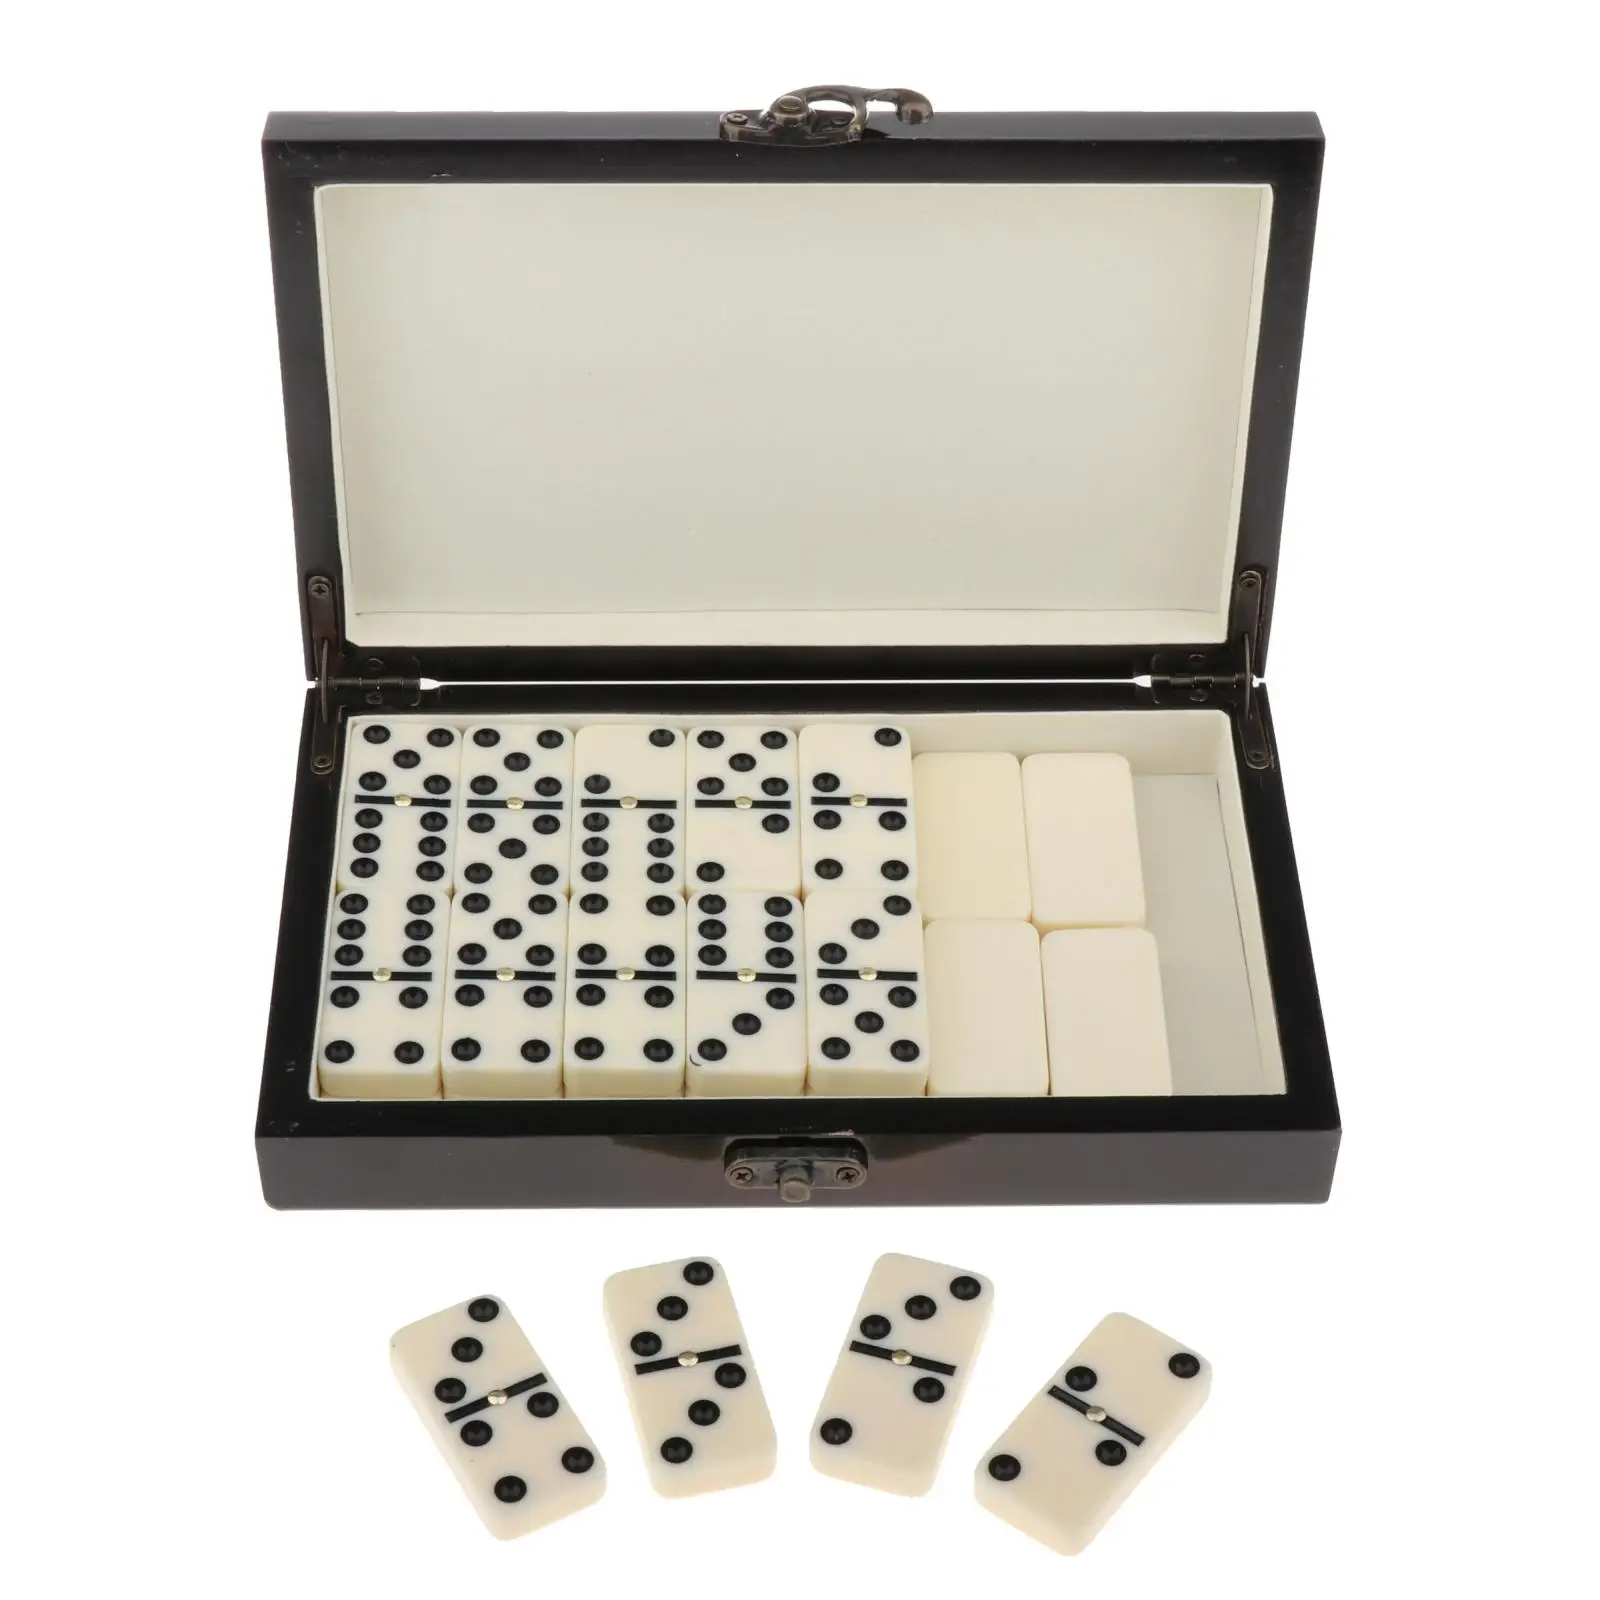 Retro Dominoes Set 28 Pieces Classic Funny Table Game Gift with Wood Case for Boys Girls Educational Toys 2-4 Players